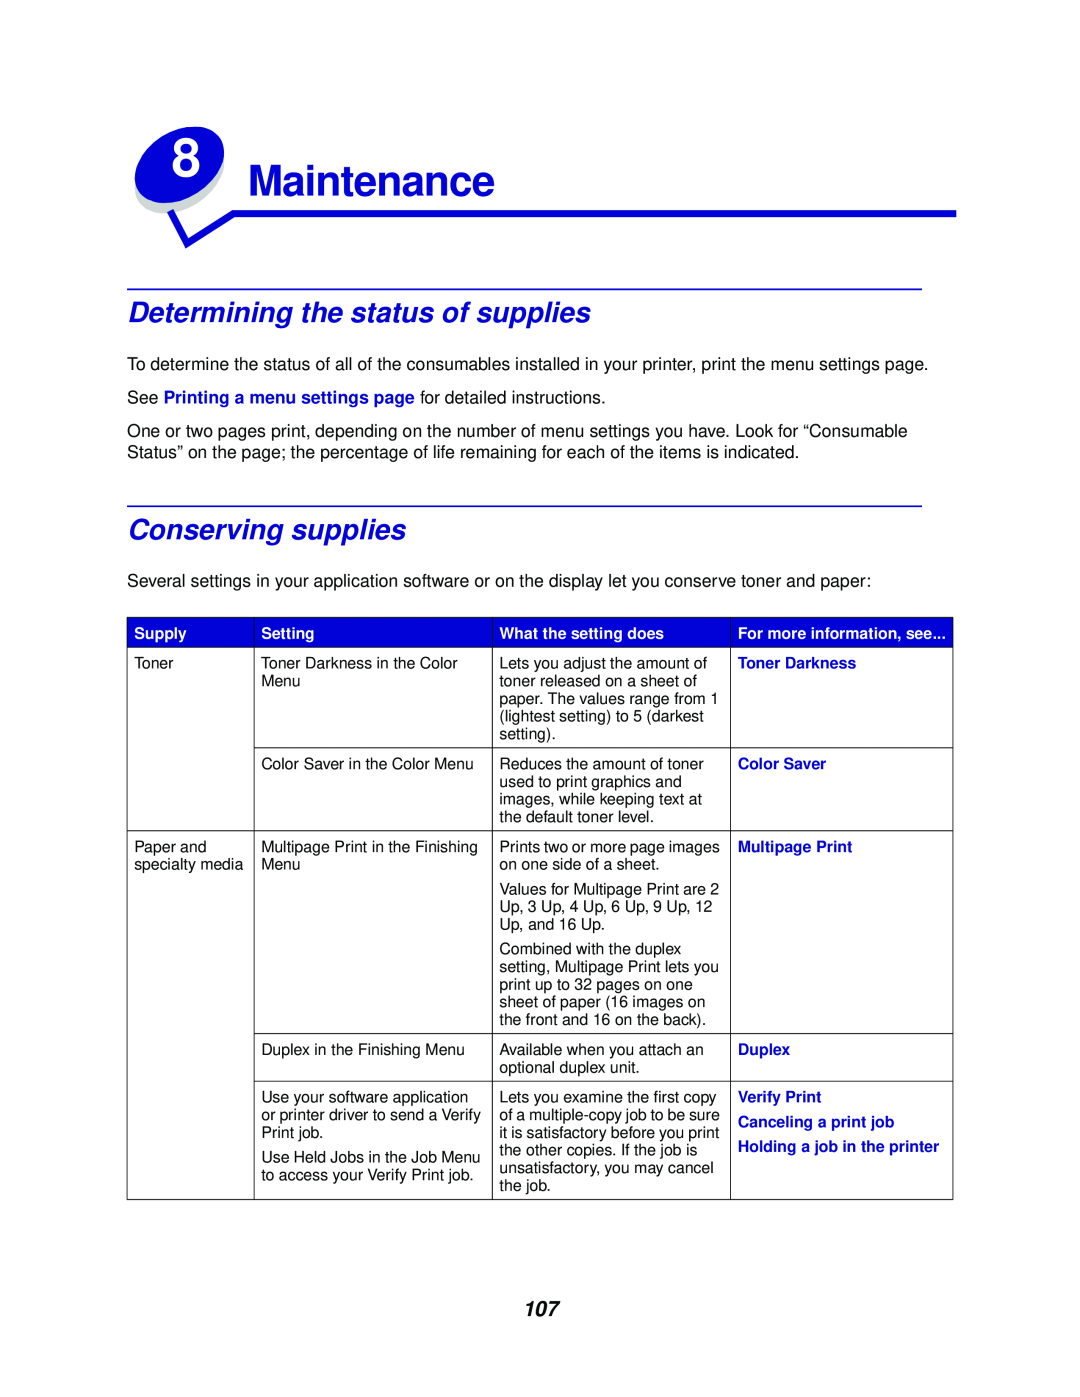 Lexmark 762 manual Maintenance, Determining the status of supplies, Conserving supplies 